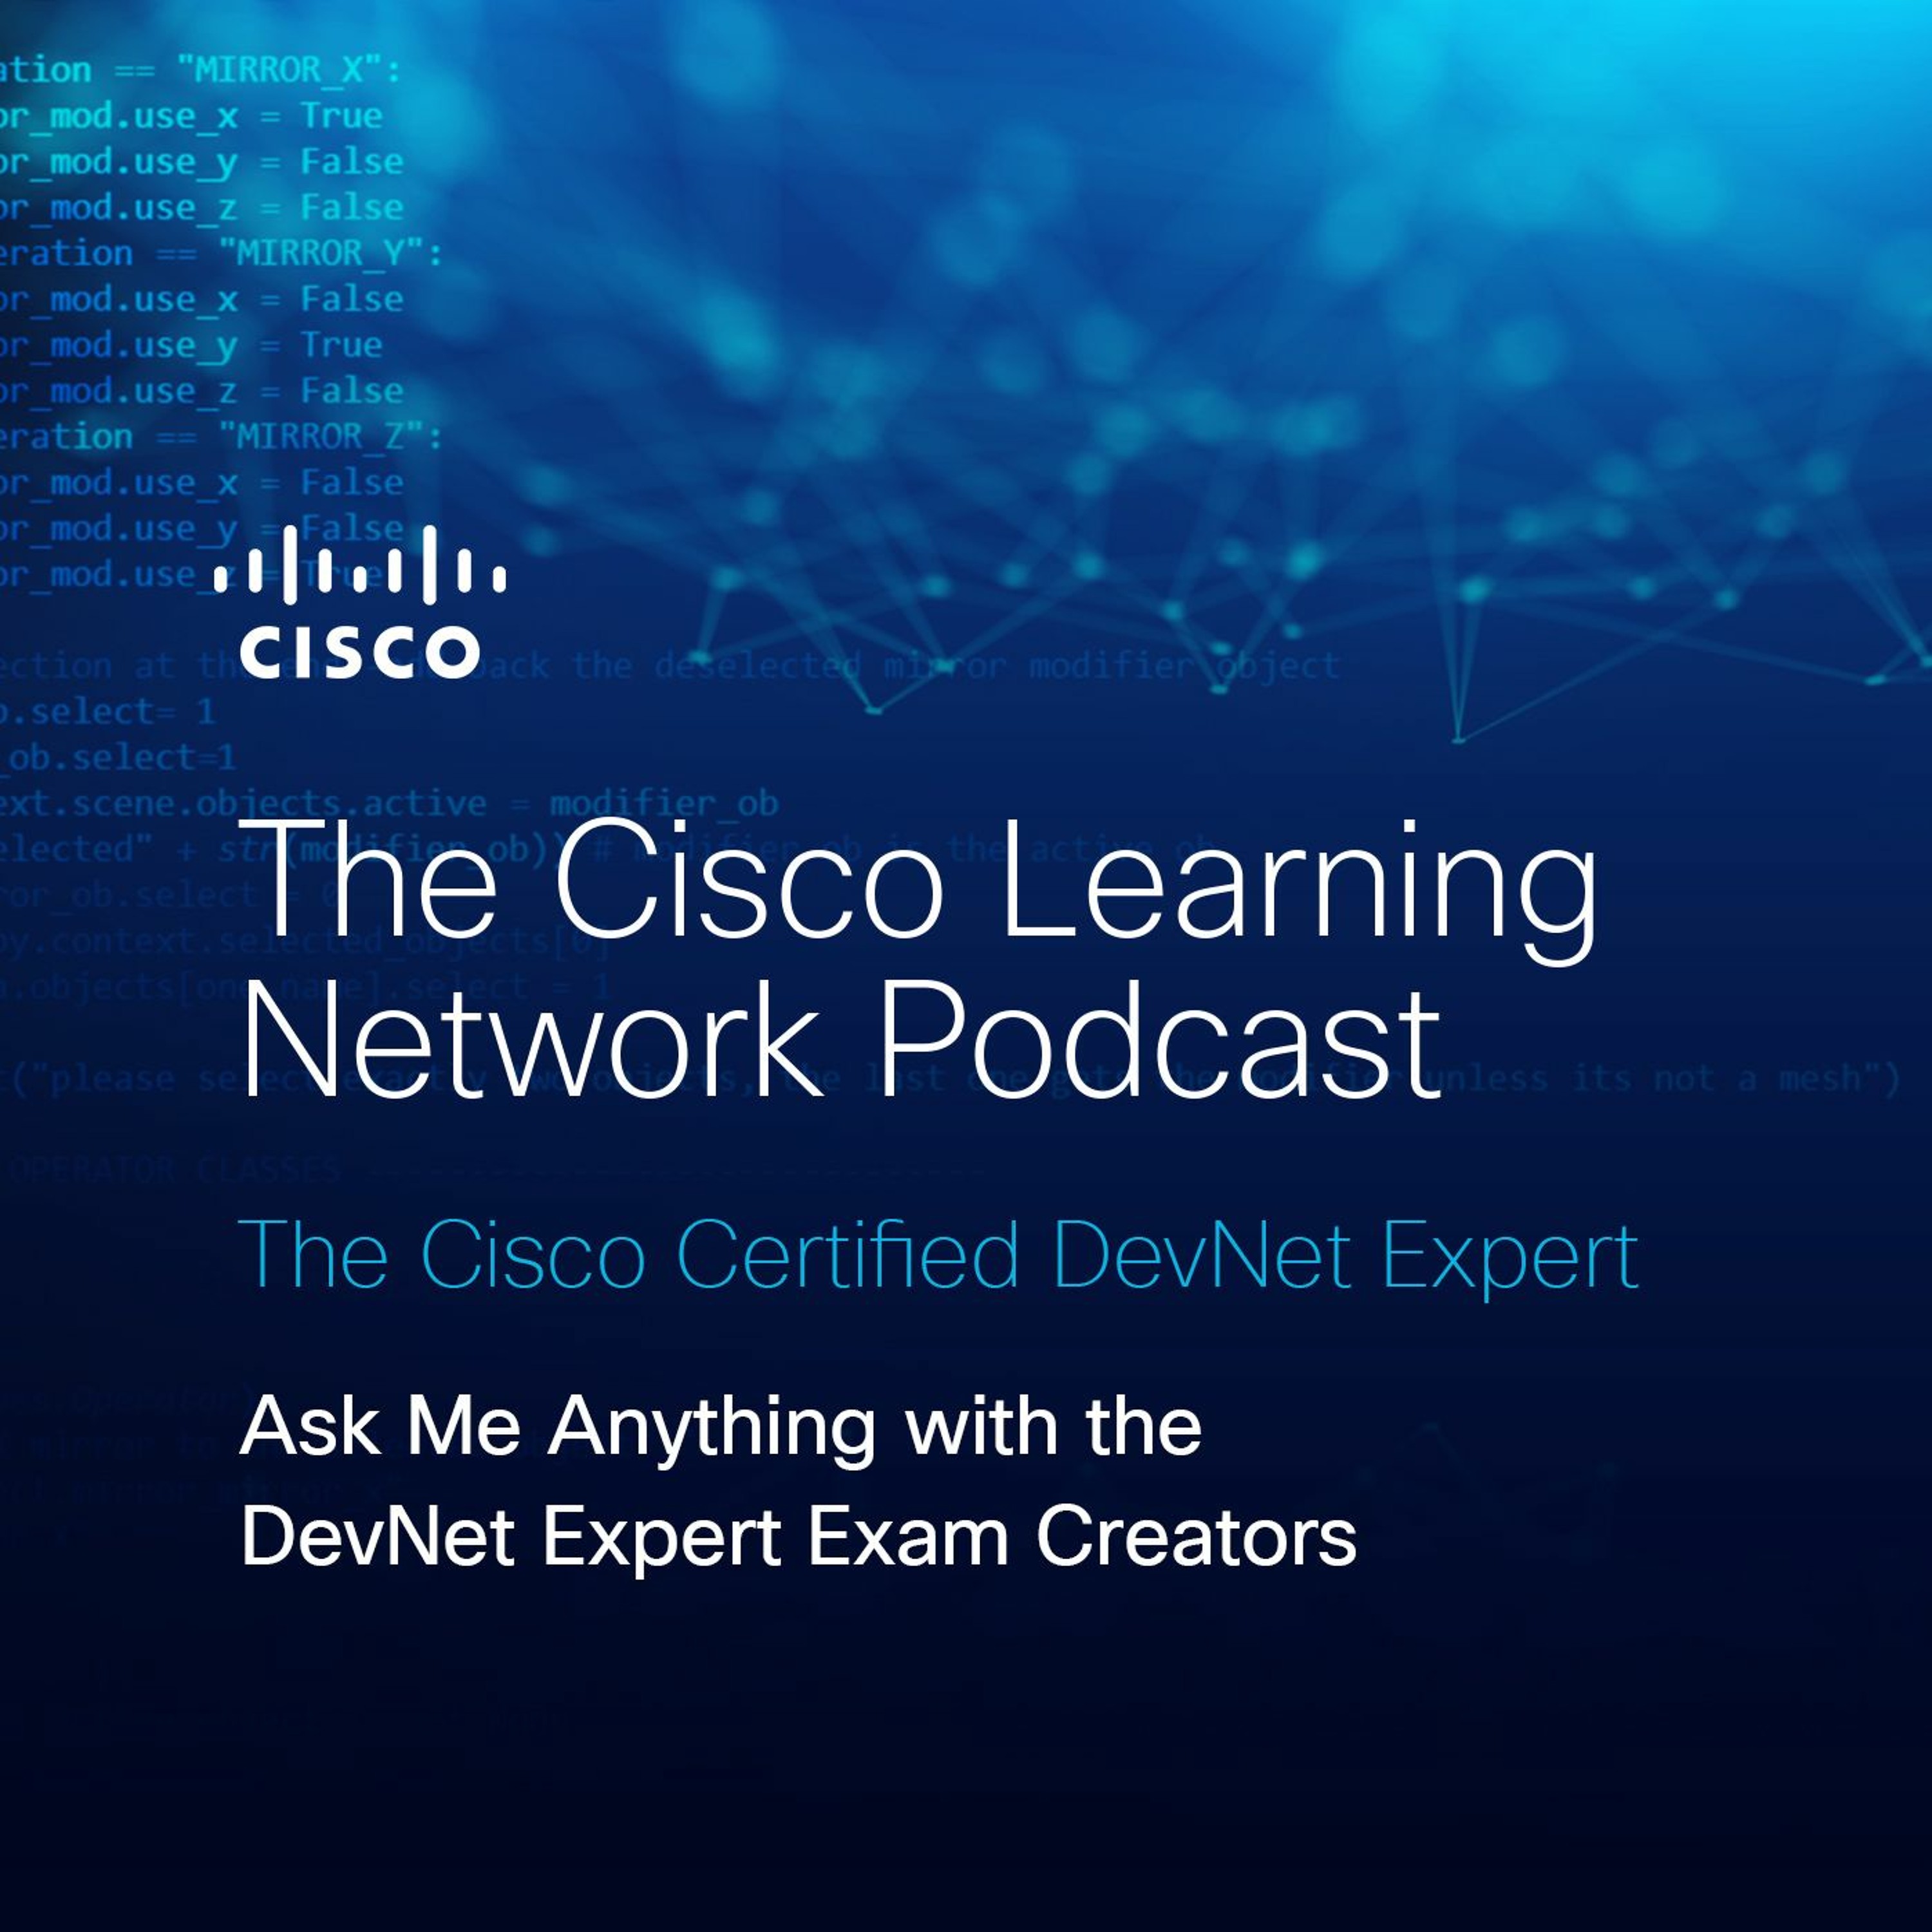 Ask Me Anything with the DevNet Expert Exam Creators